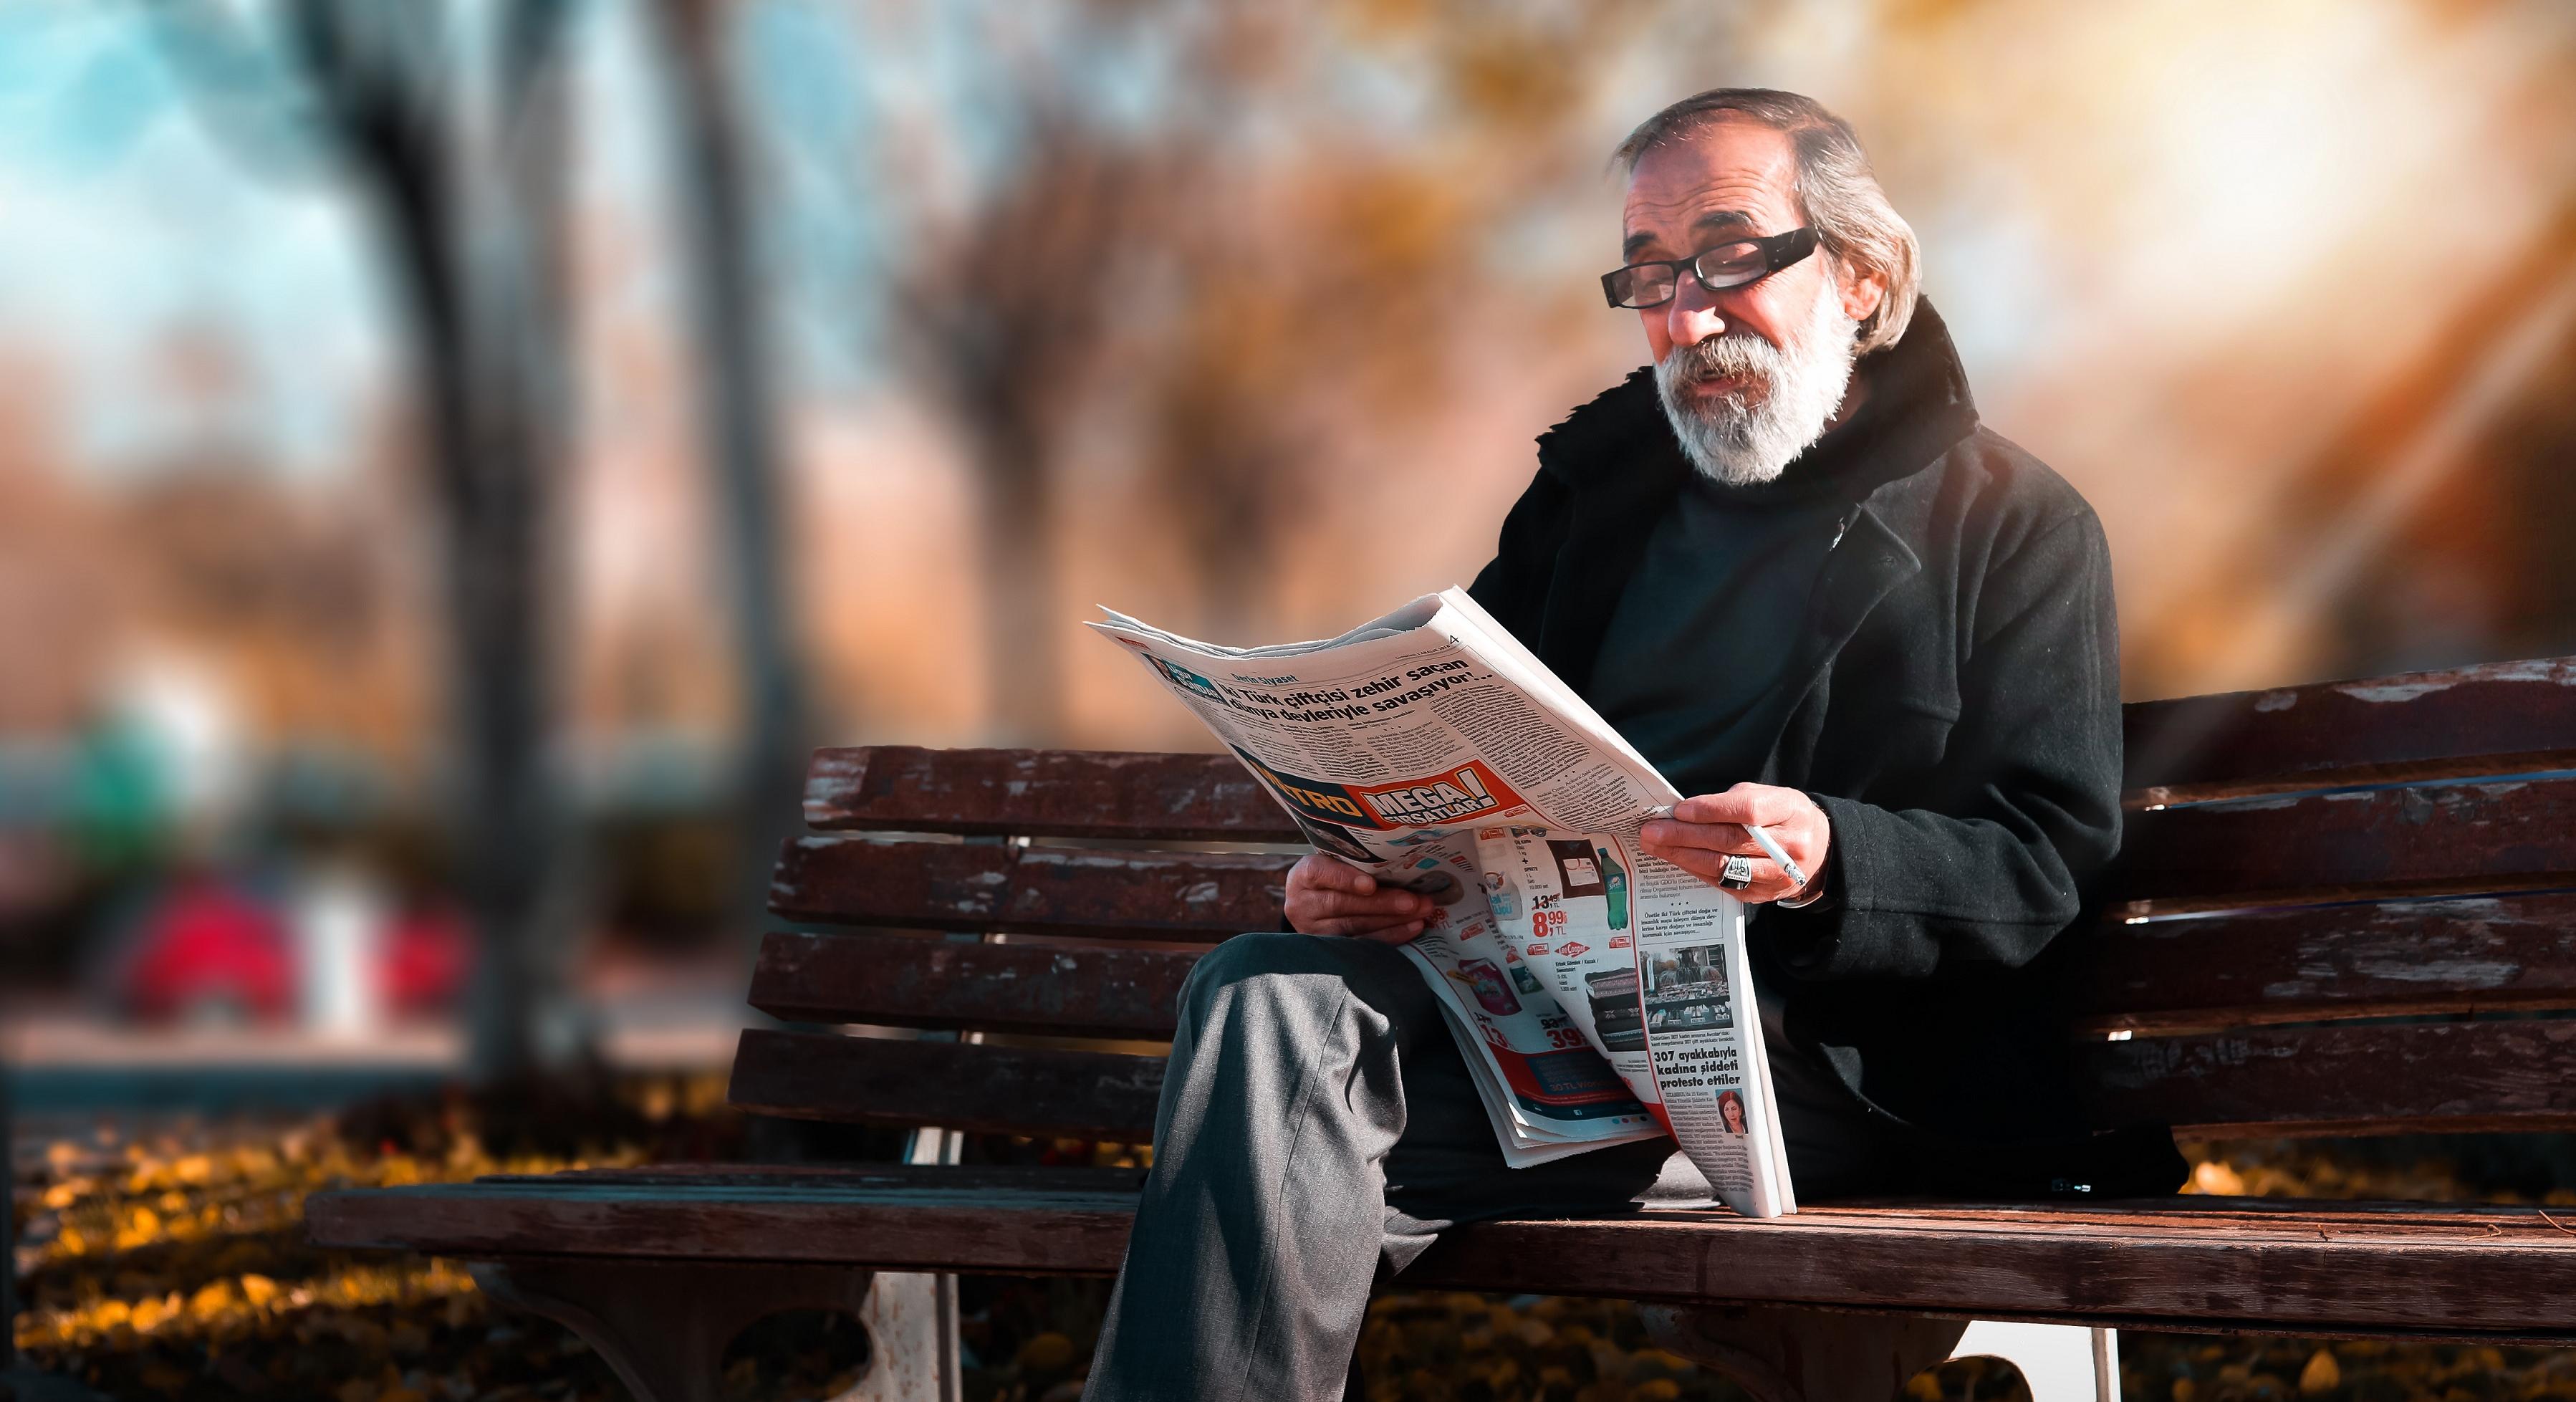 man sitting on park bench reading the newspaper